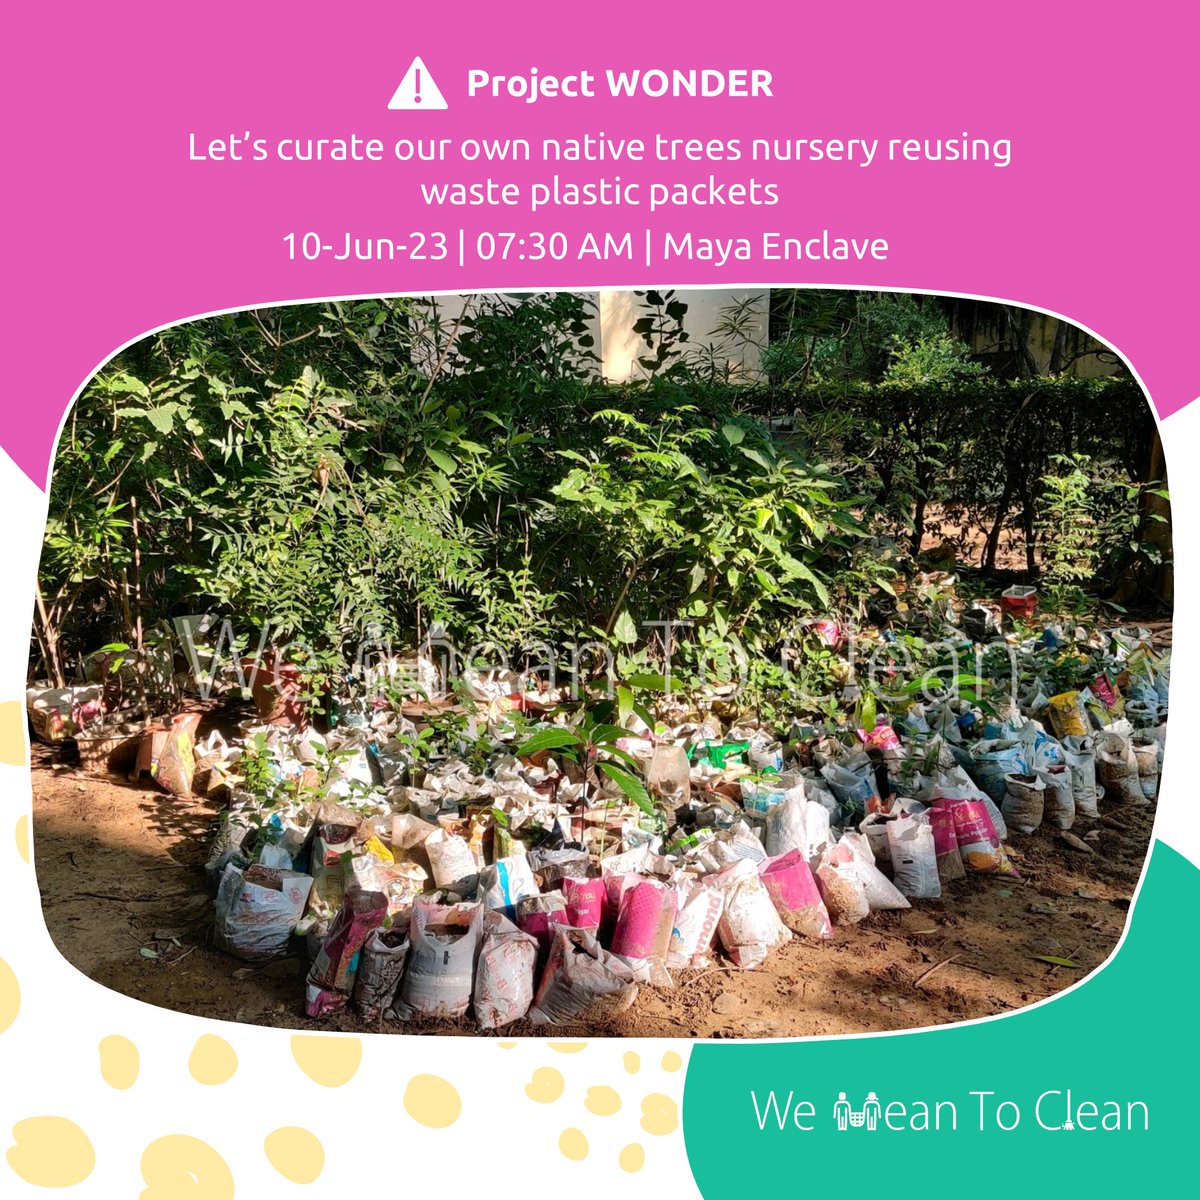 #ProjectWONDER
We're reusing waste plastic packets to create a native trees nursery
Join us!
Visit meetup.com/we-mean-to-cle…

#WeMeanToClean #CleanDelhi #SwachhBharat #MyCleanIndia #AirPollution #DelhiPollution #DelhiAirPollution #WasteManagement #Reuse #ClimateActionNow